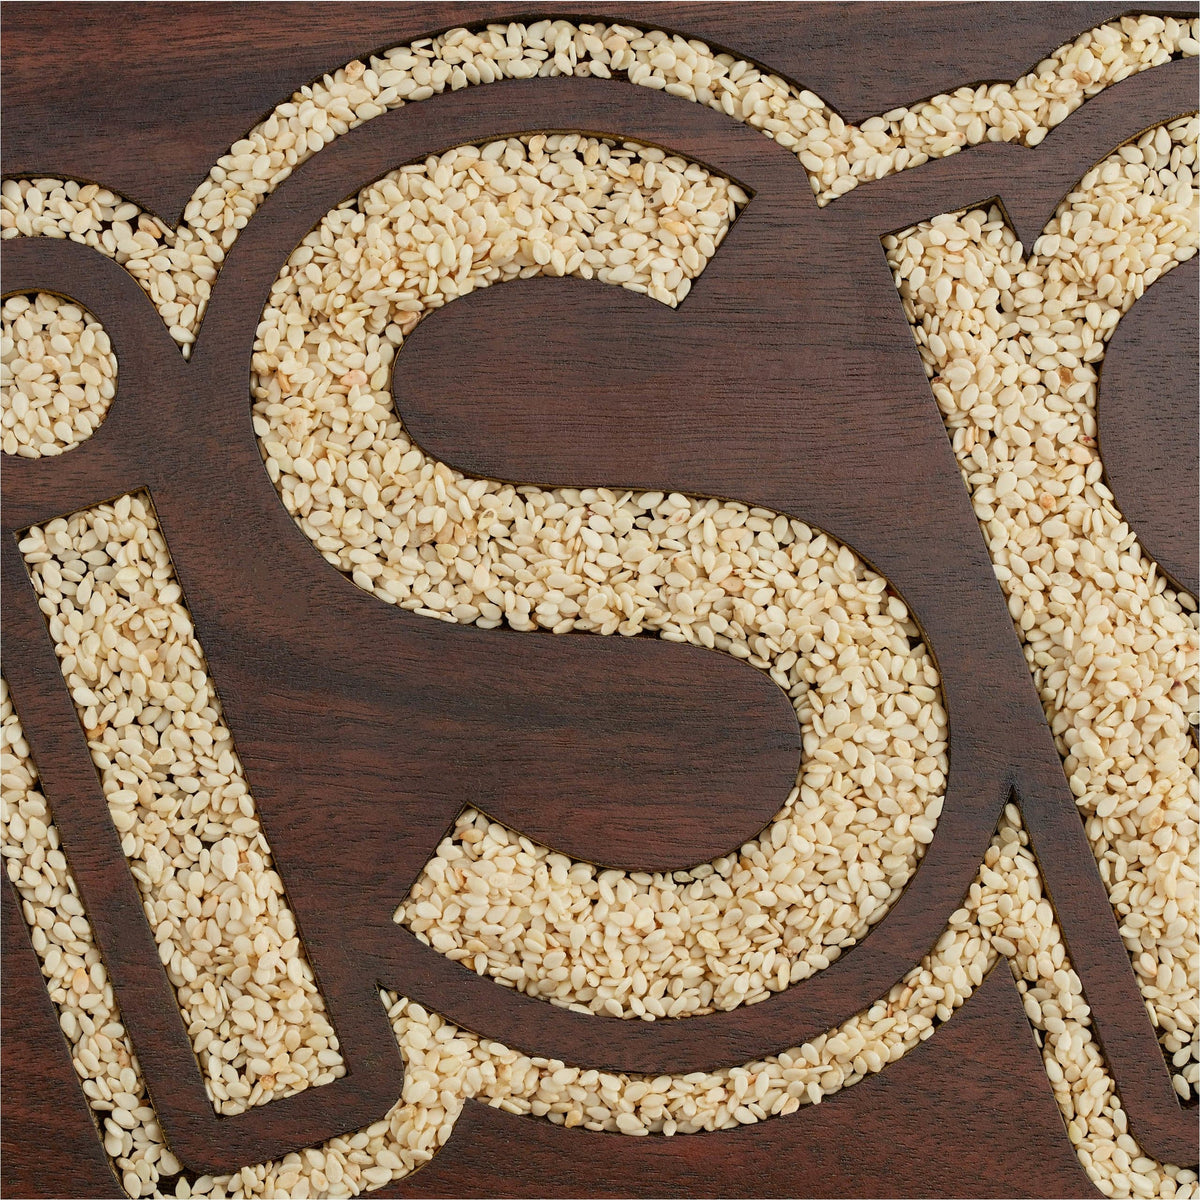 Everything You Need to Know About Hulled Sesame Seeds